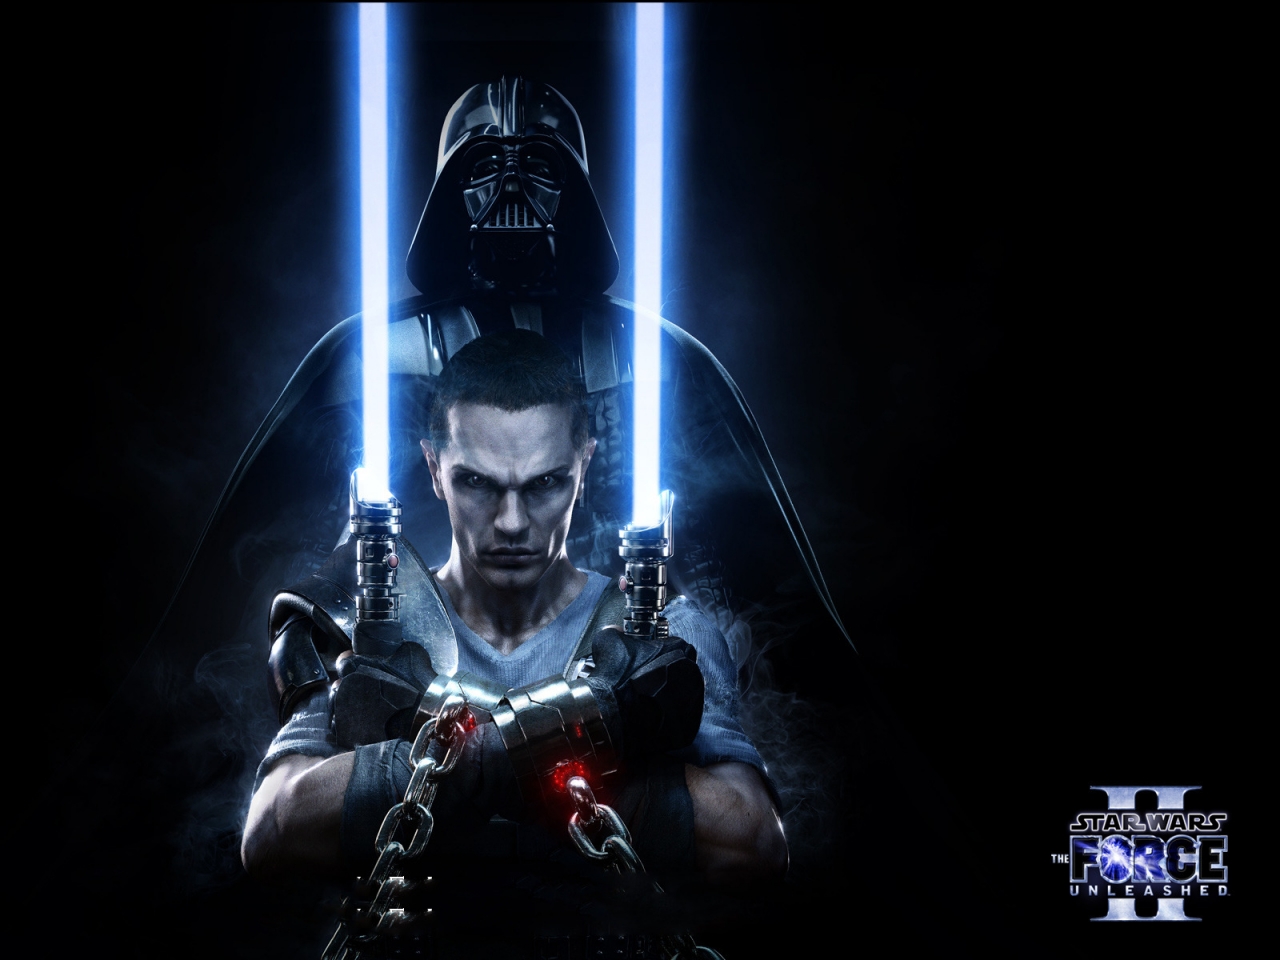 Star Wars The force Unleashed 2 Poster for 1280 x 960 resolution